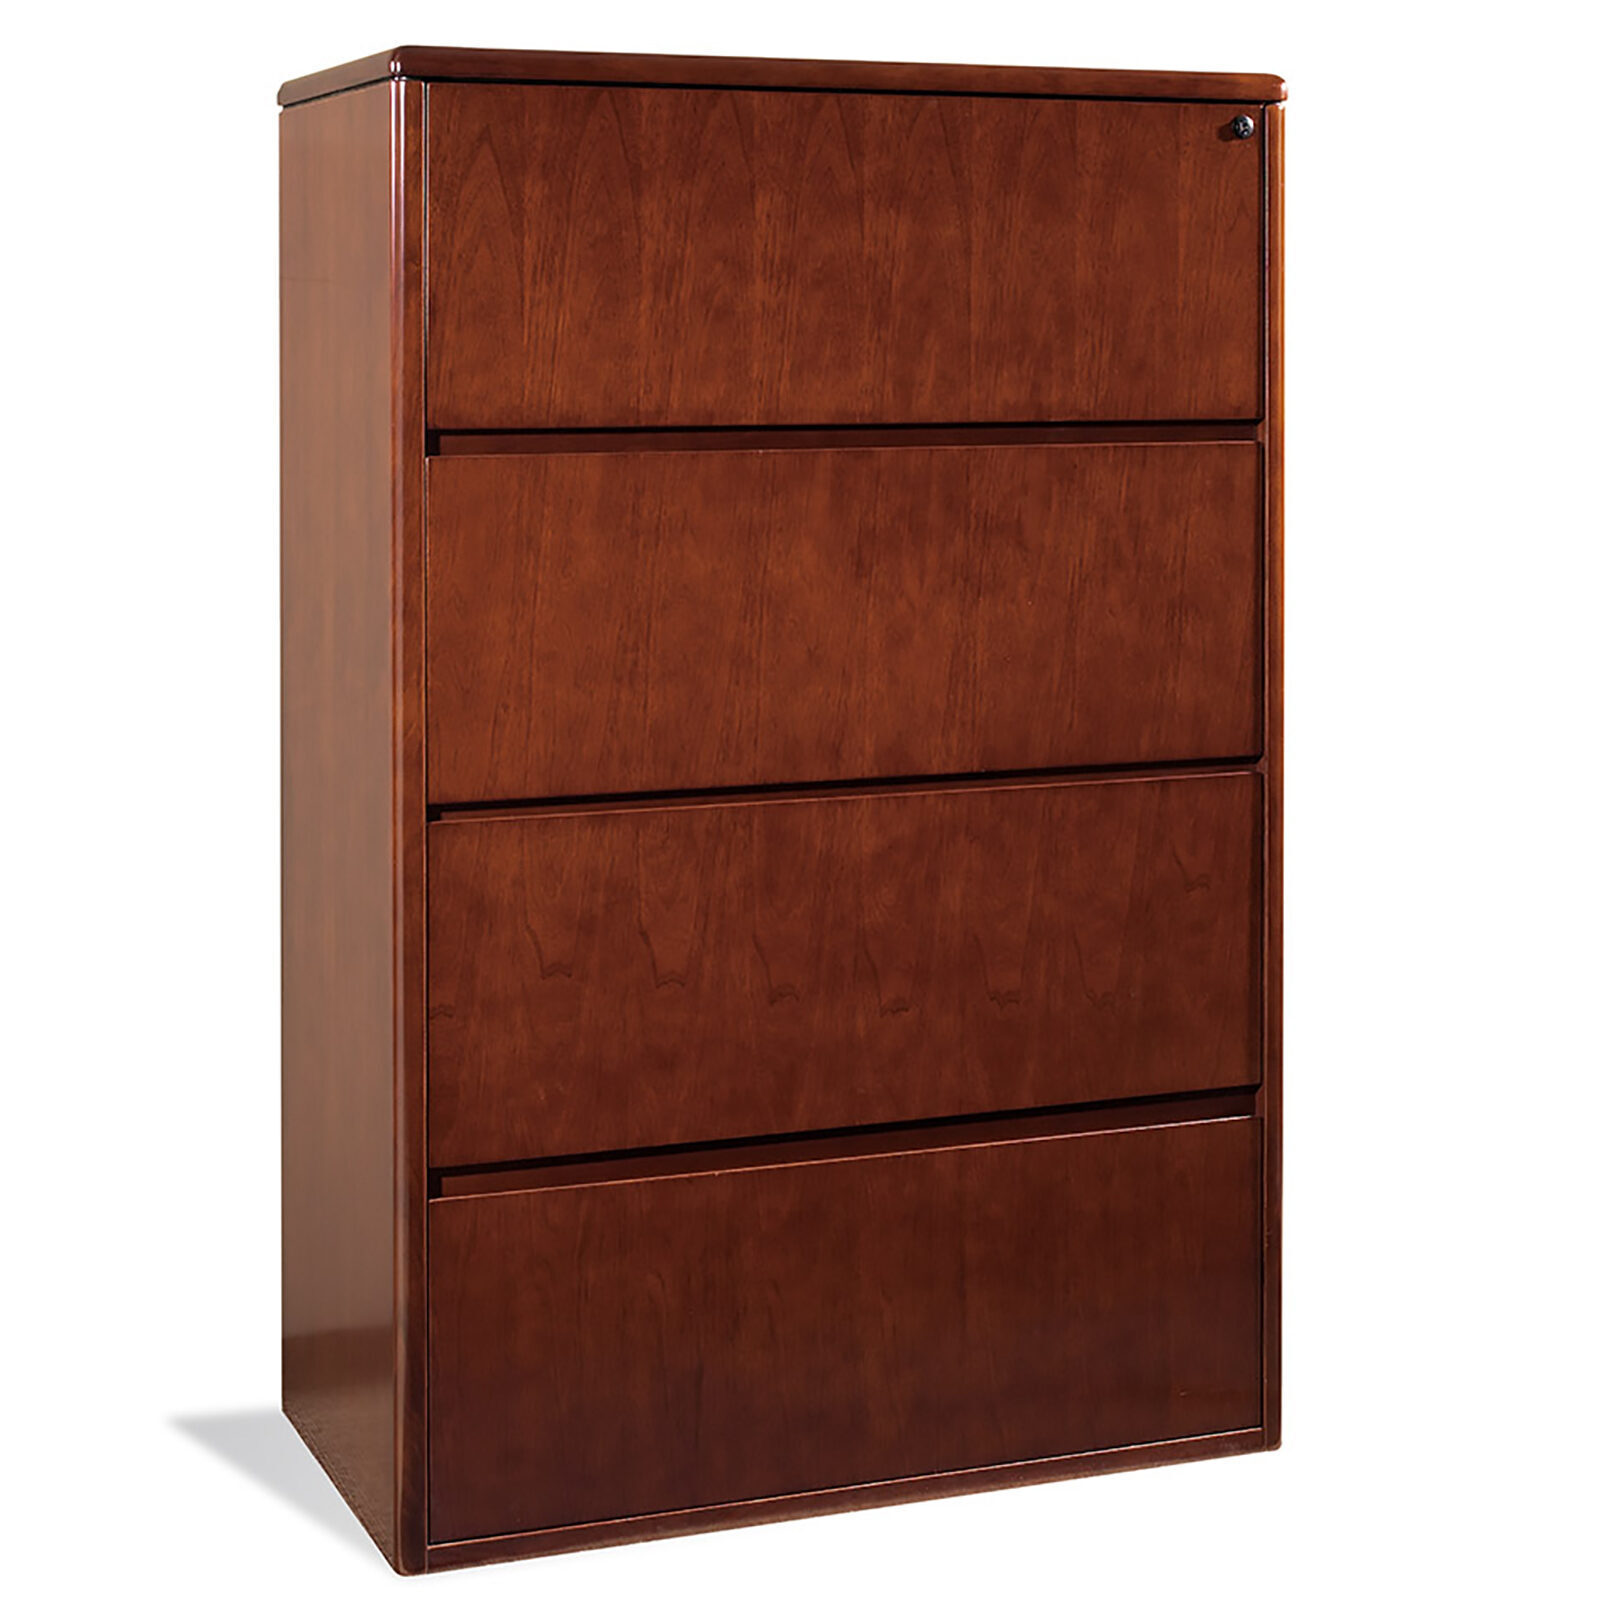 4-drawer wood lateral file